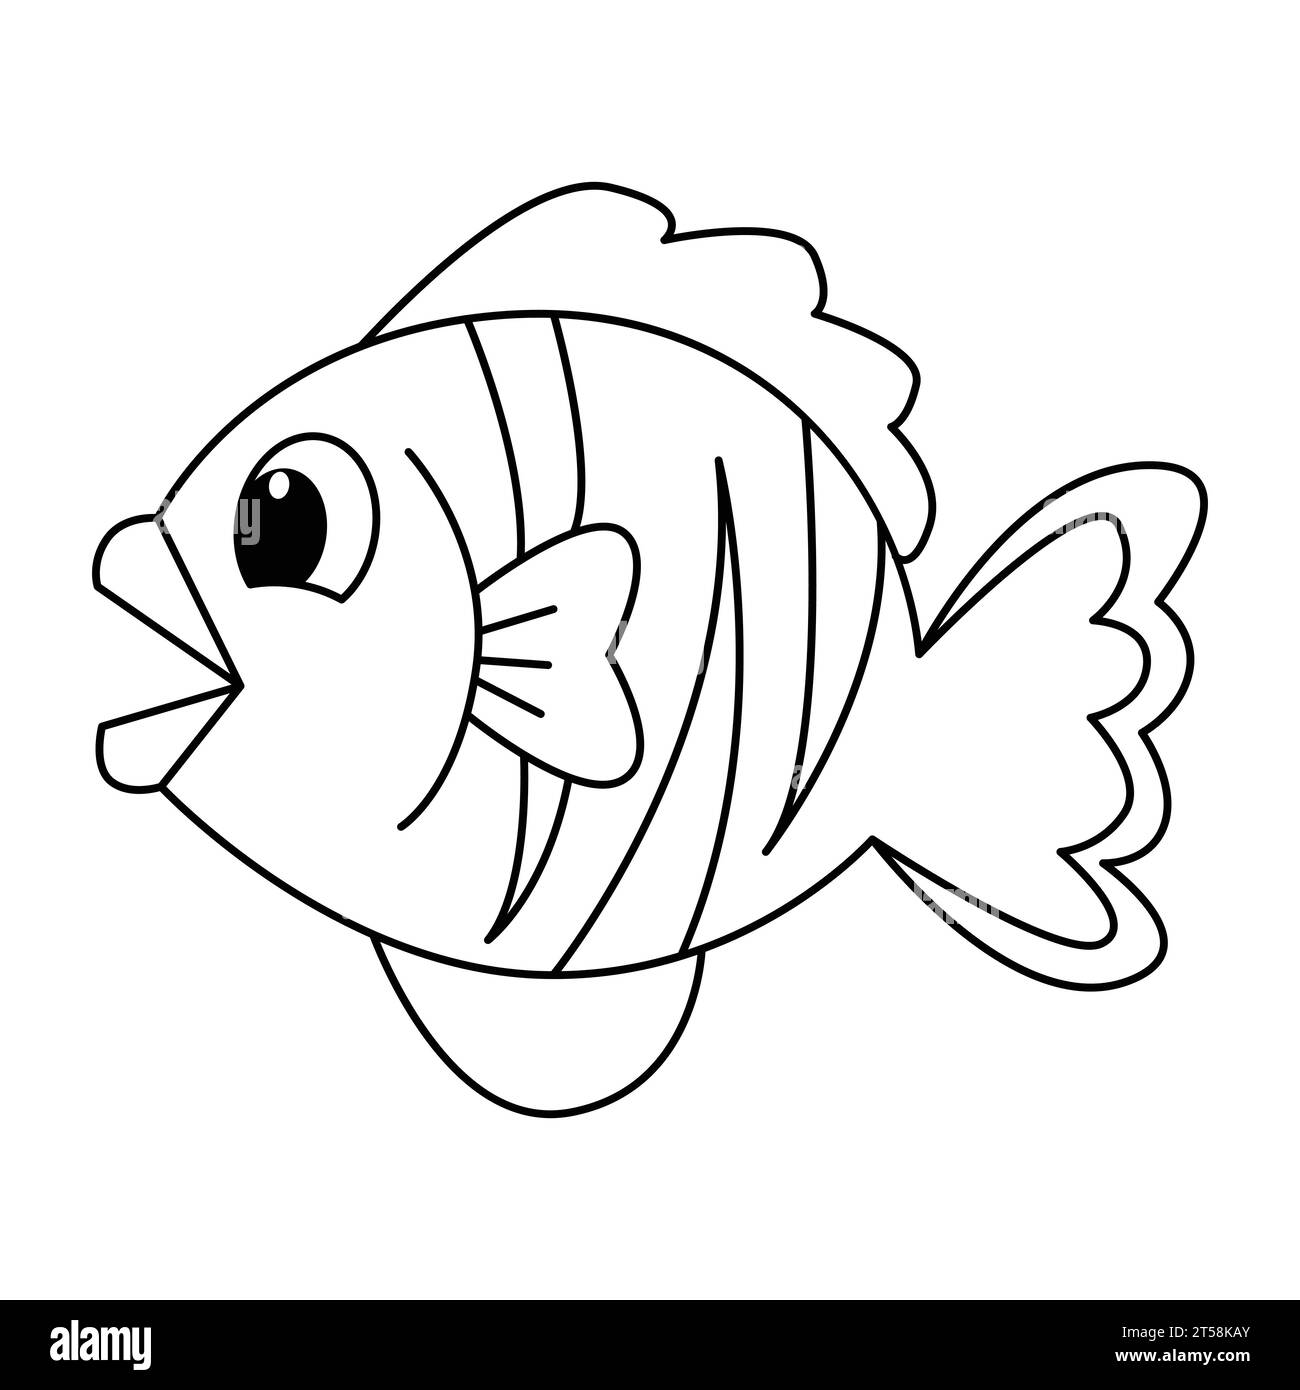 Cute crab cartoon coloring page for kids Vector Image Stock Vector